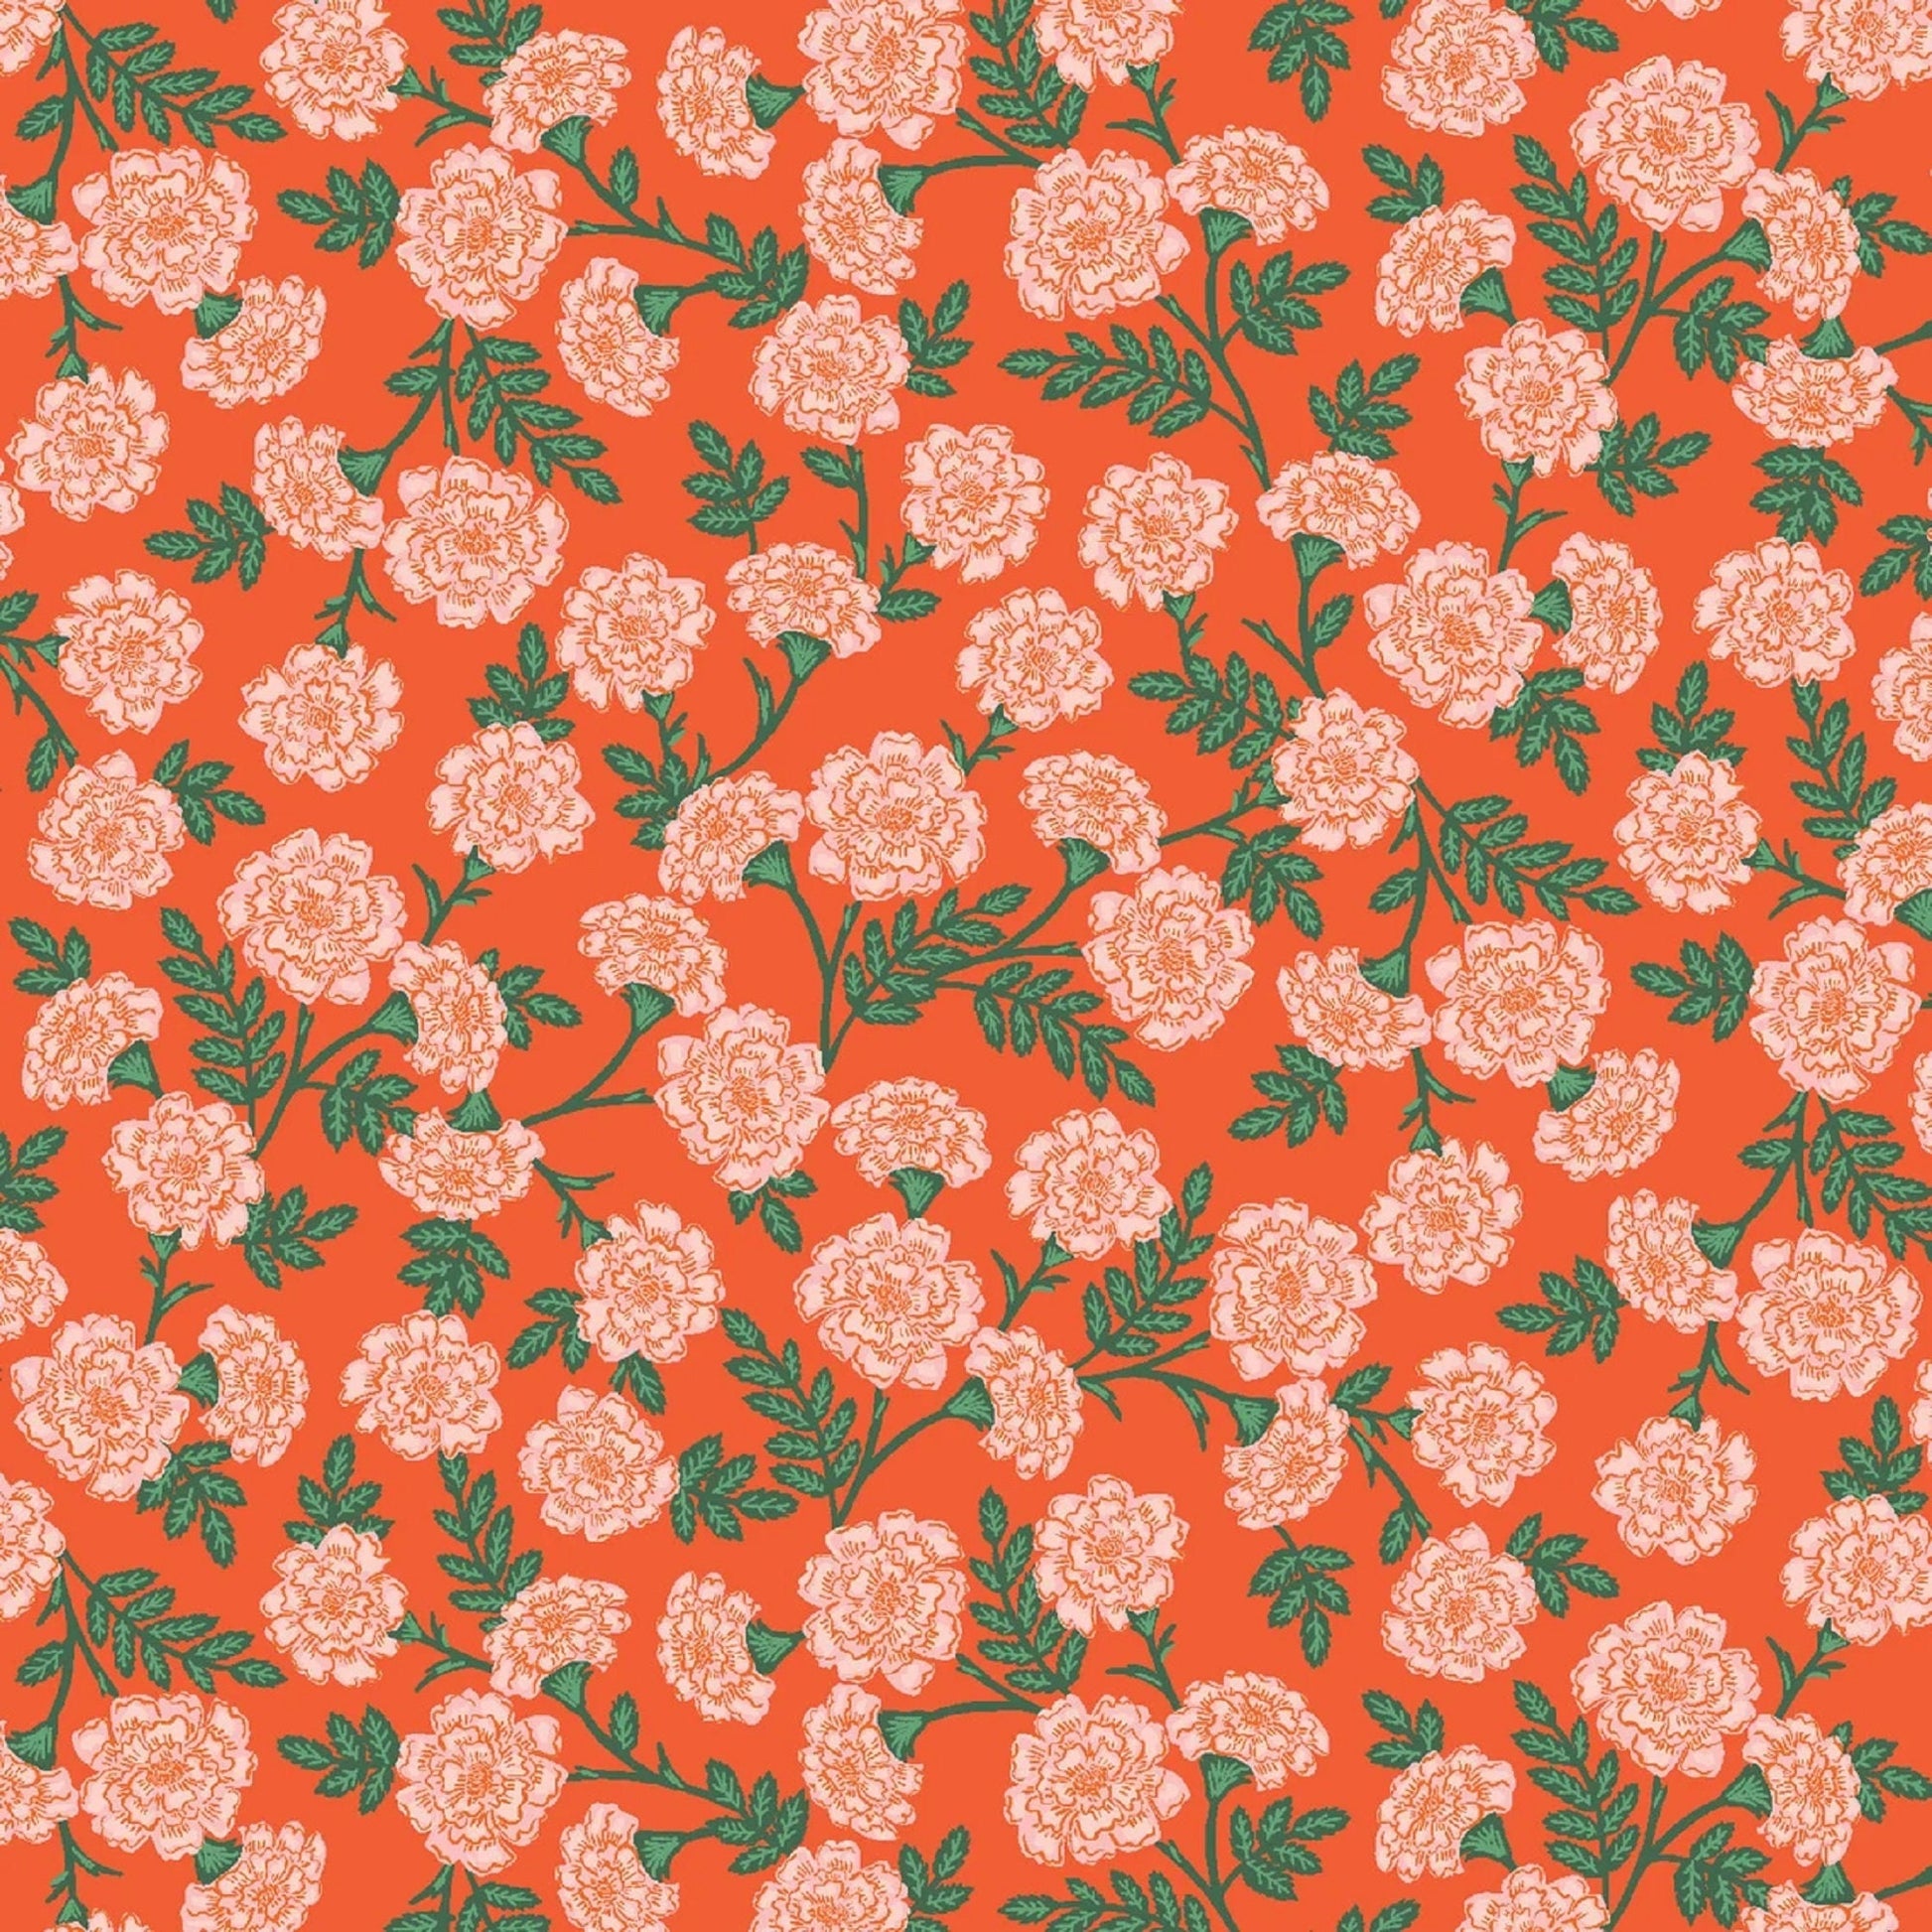 Dianthus Red Bramble Anna Bond Rifle Paper Co Cotton + Steel 100% Quilters Cotton Fabric Fetish